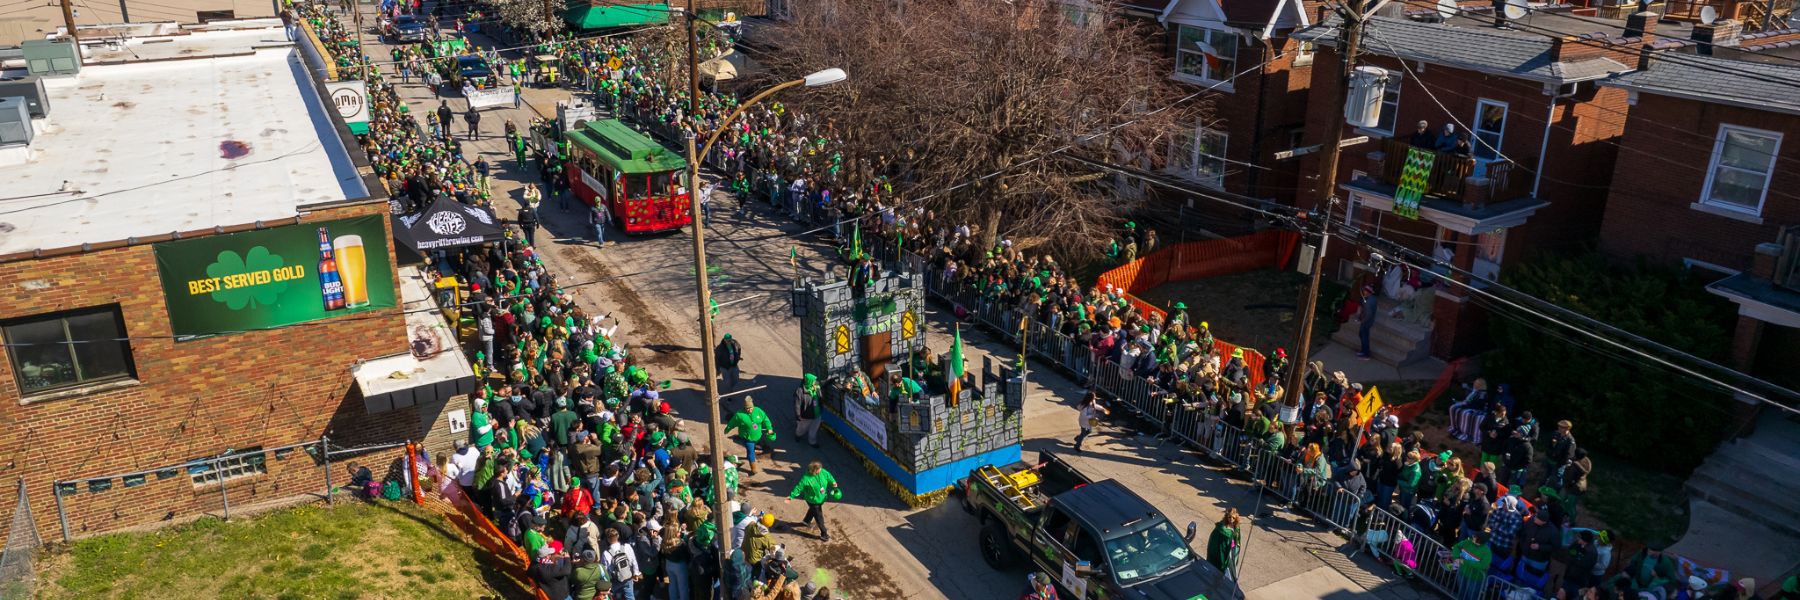 The St. Patrick's Day parade travels down the streets of Dogtown.